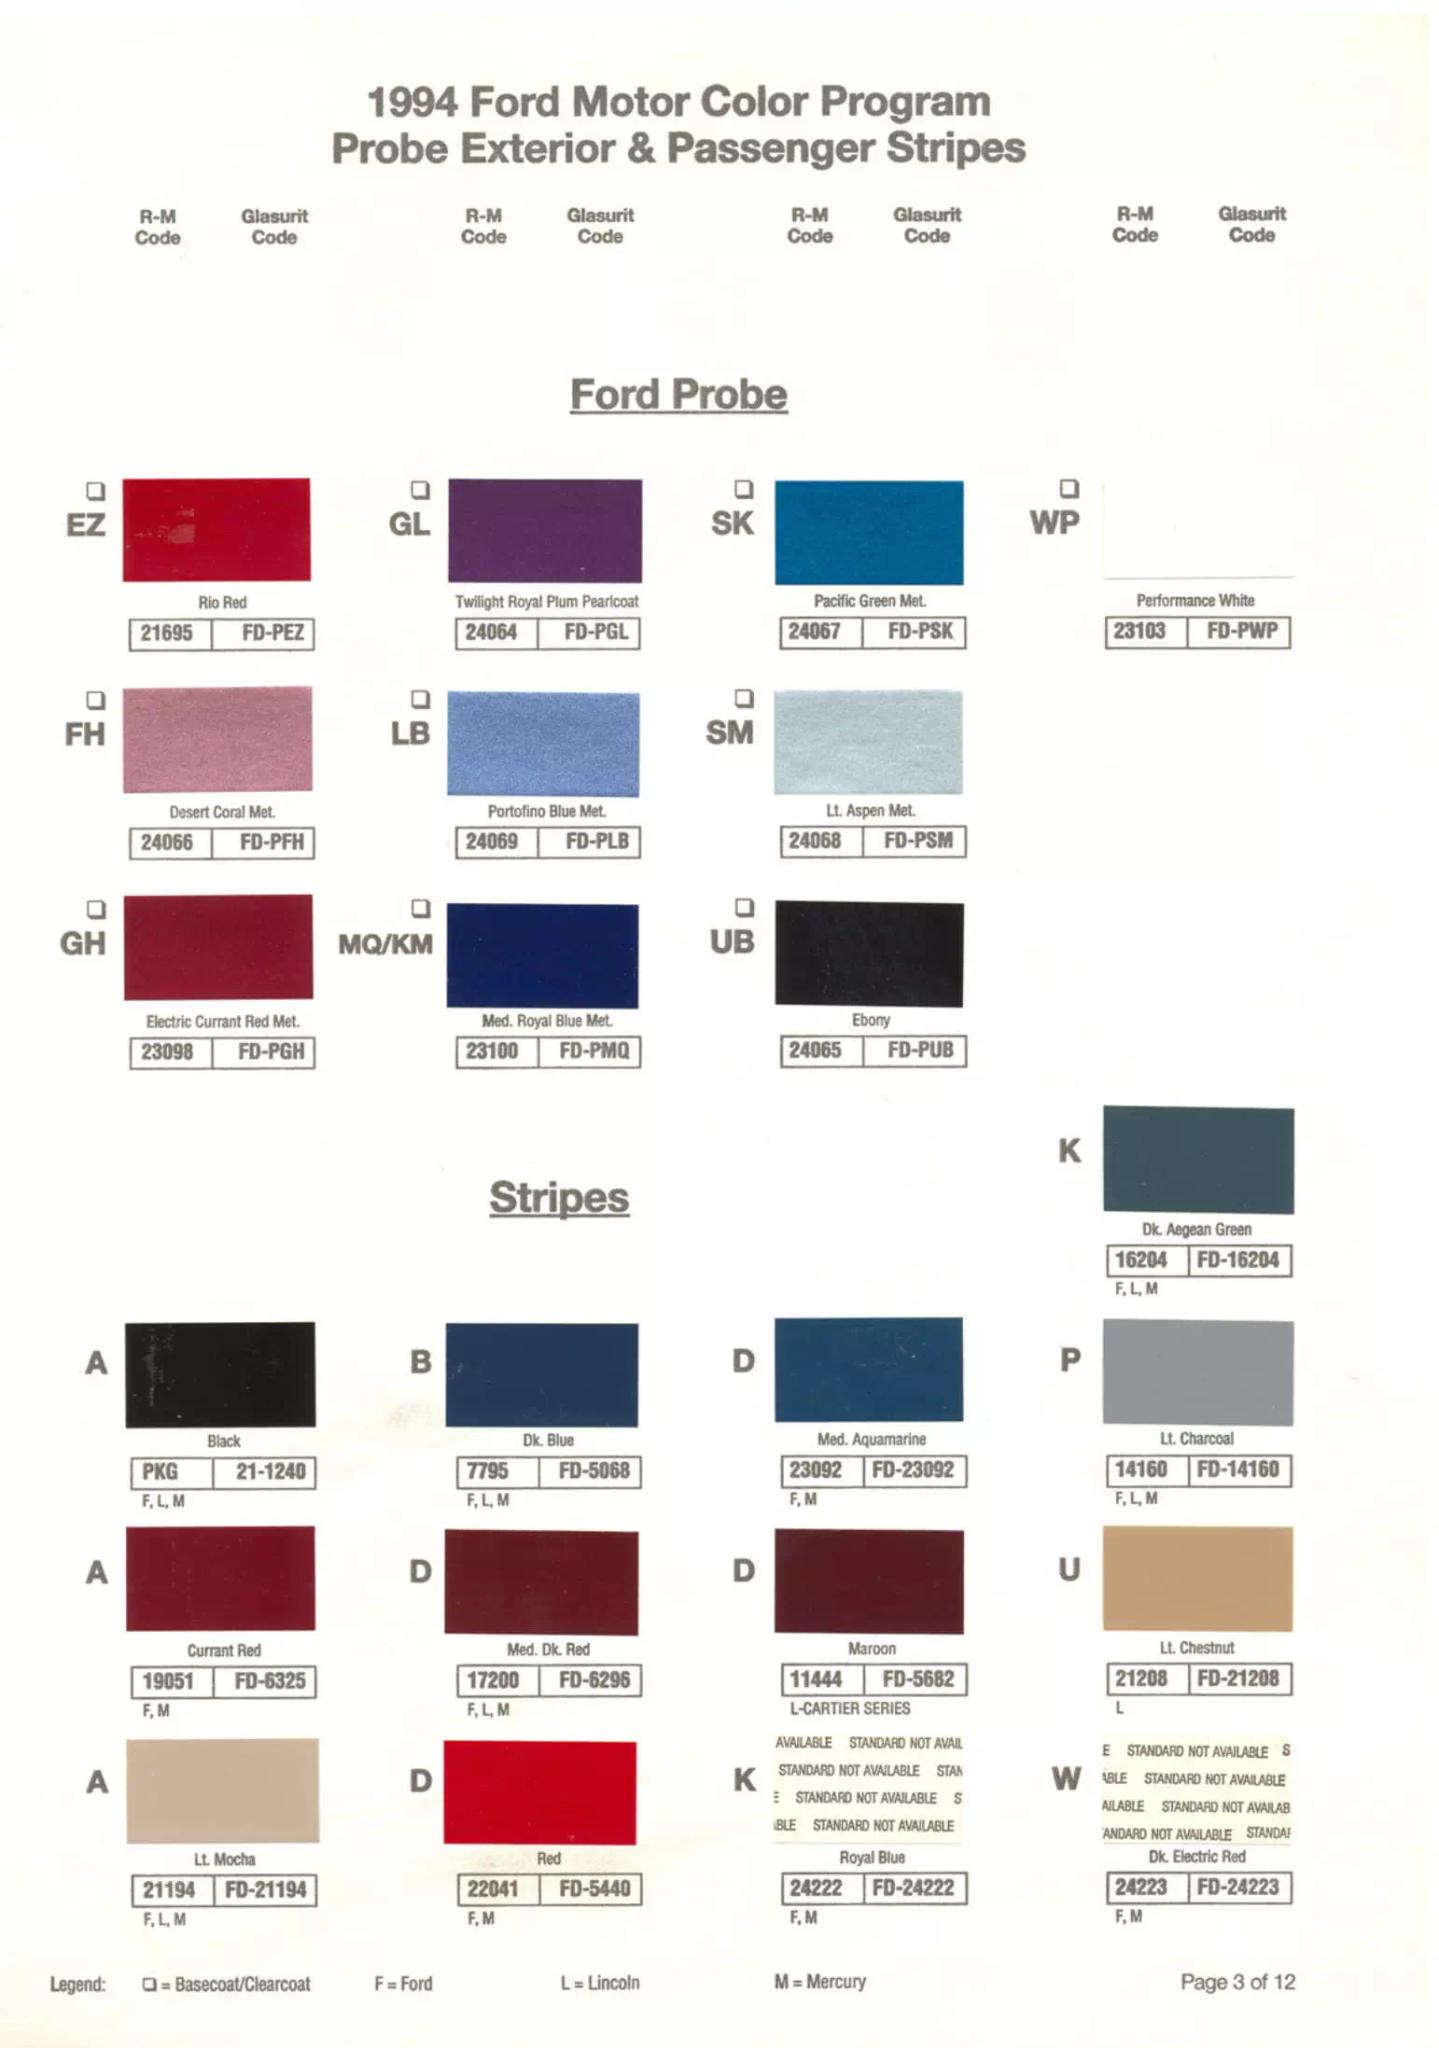 Ford, Lincoln, and Mercury, paint code swatches ( color examples )  oem paint codes and mixing stock numbers for those colors.